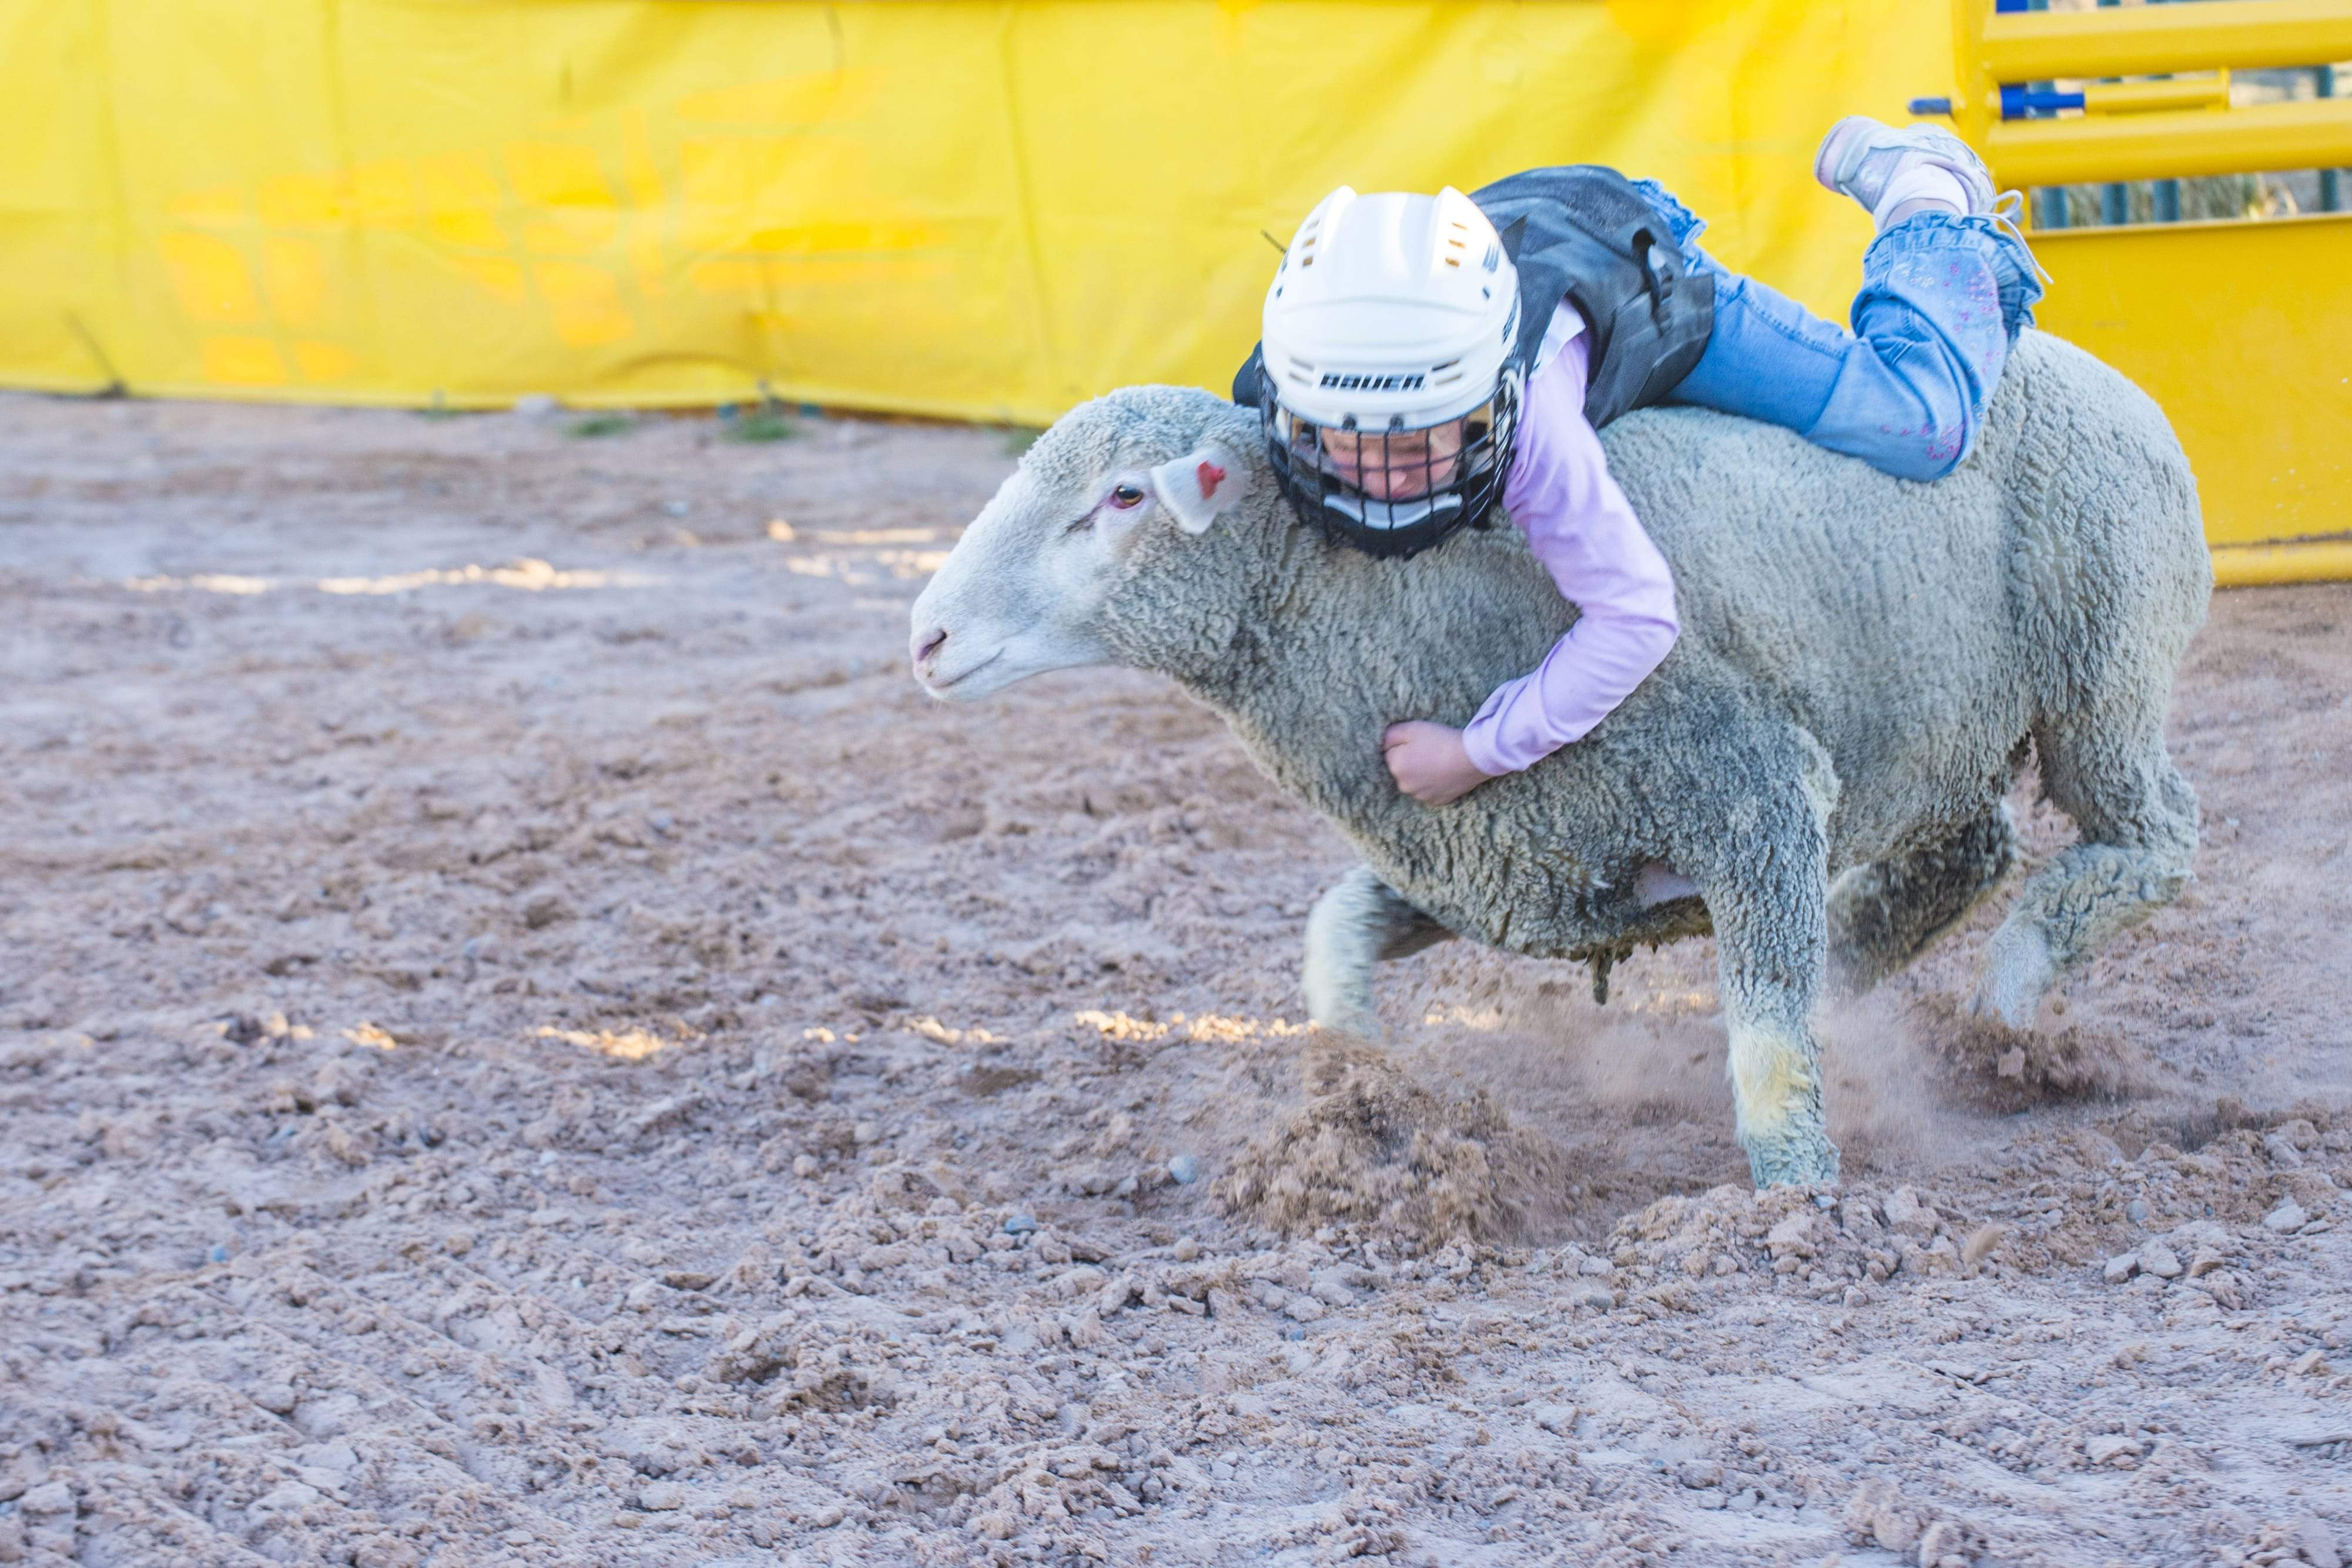 Image shows child on sheep